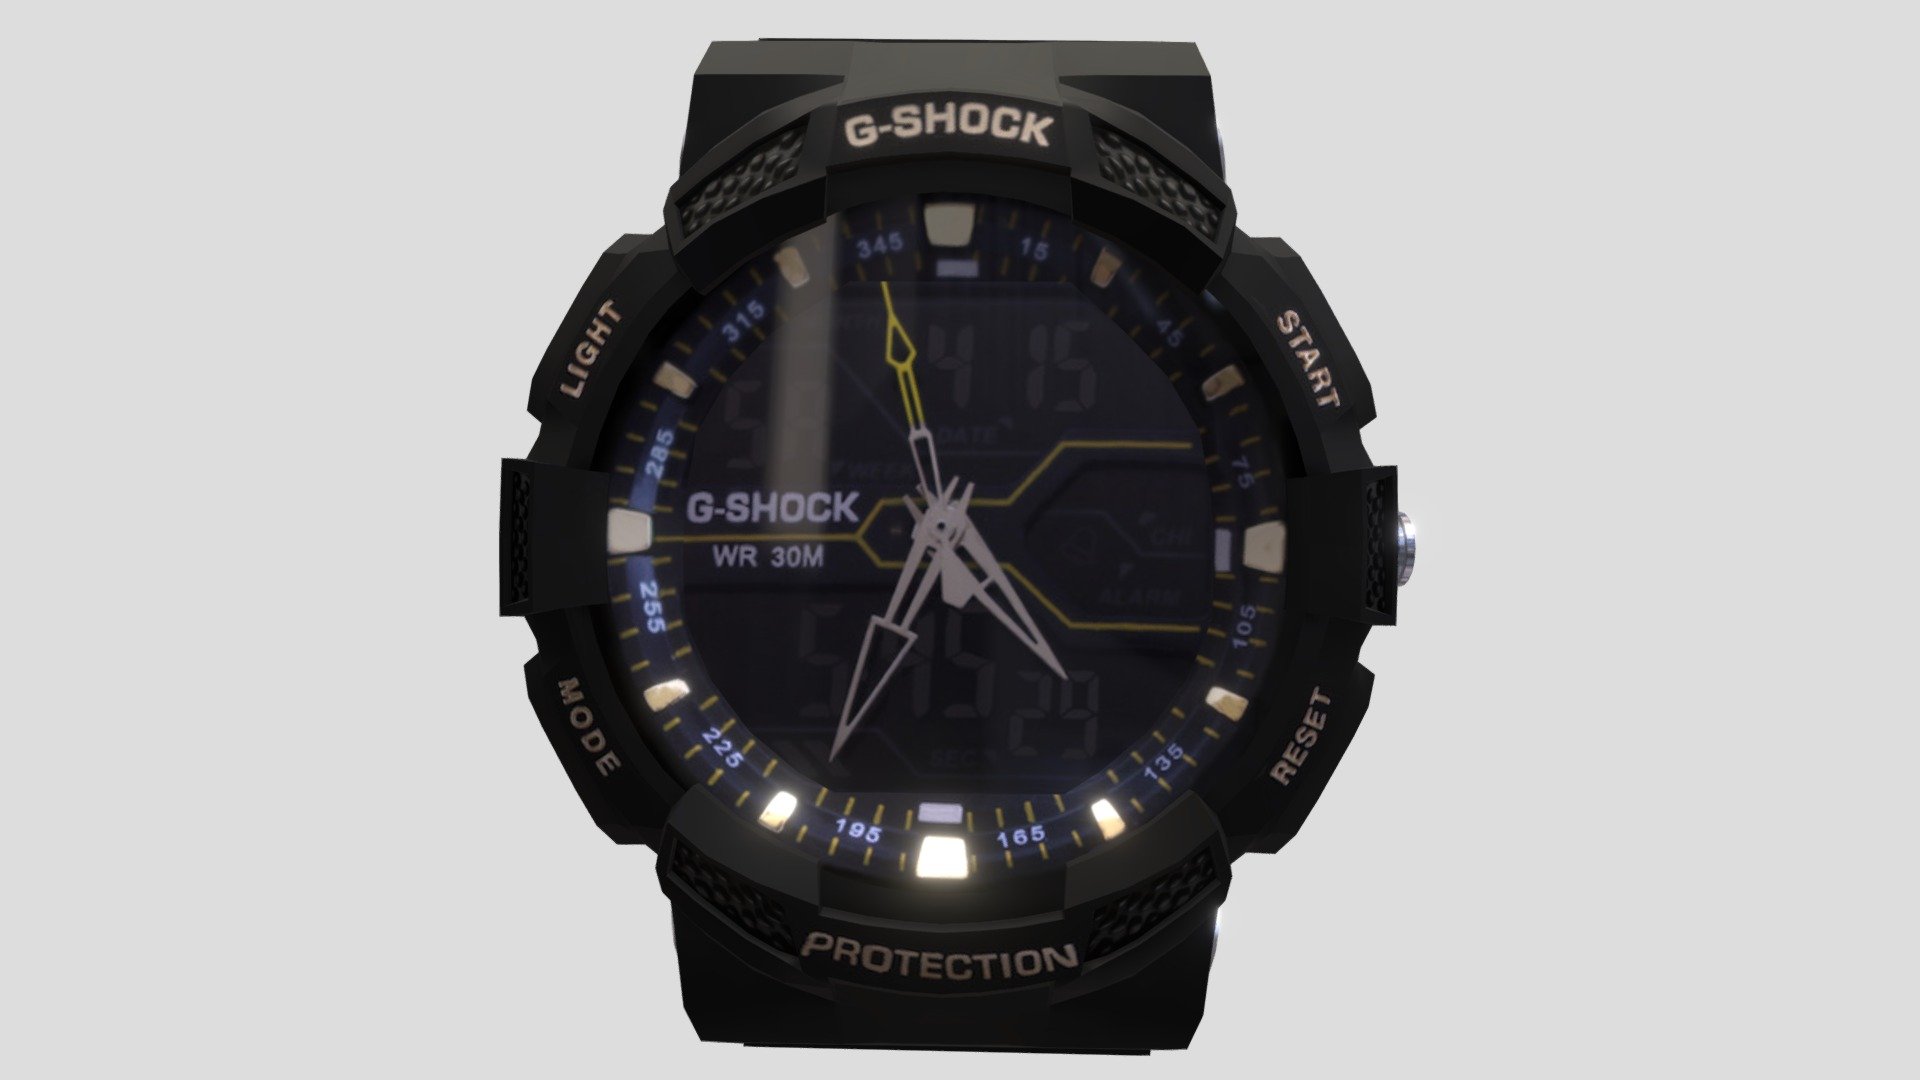 The model of the Casio G-Shock watch.
Format FBX file size : 247KB

Click on the link to see more models : https://sketchfab.com/GbehnamG/store

If you need personalized 3d models , feel free to contact at: mr.gbehnamg@yahoo.com - Watch Casio G-Shock Black Lowpoly - Buy Royalty Free 3D model by BehNaM (@GbehnamG) 3d model